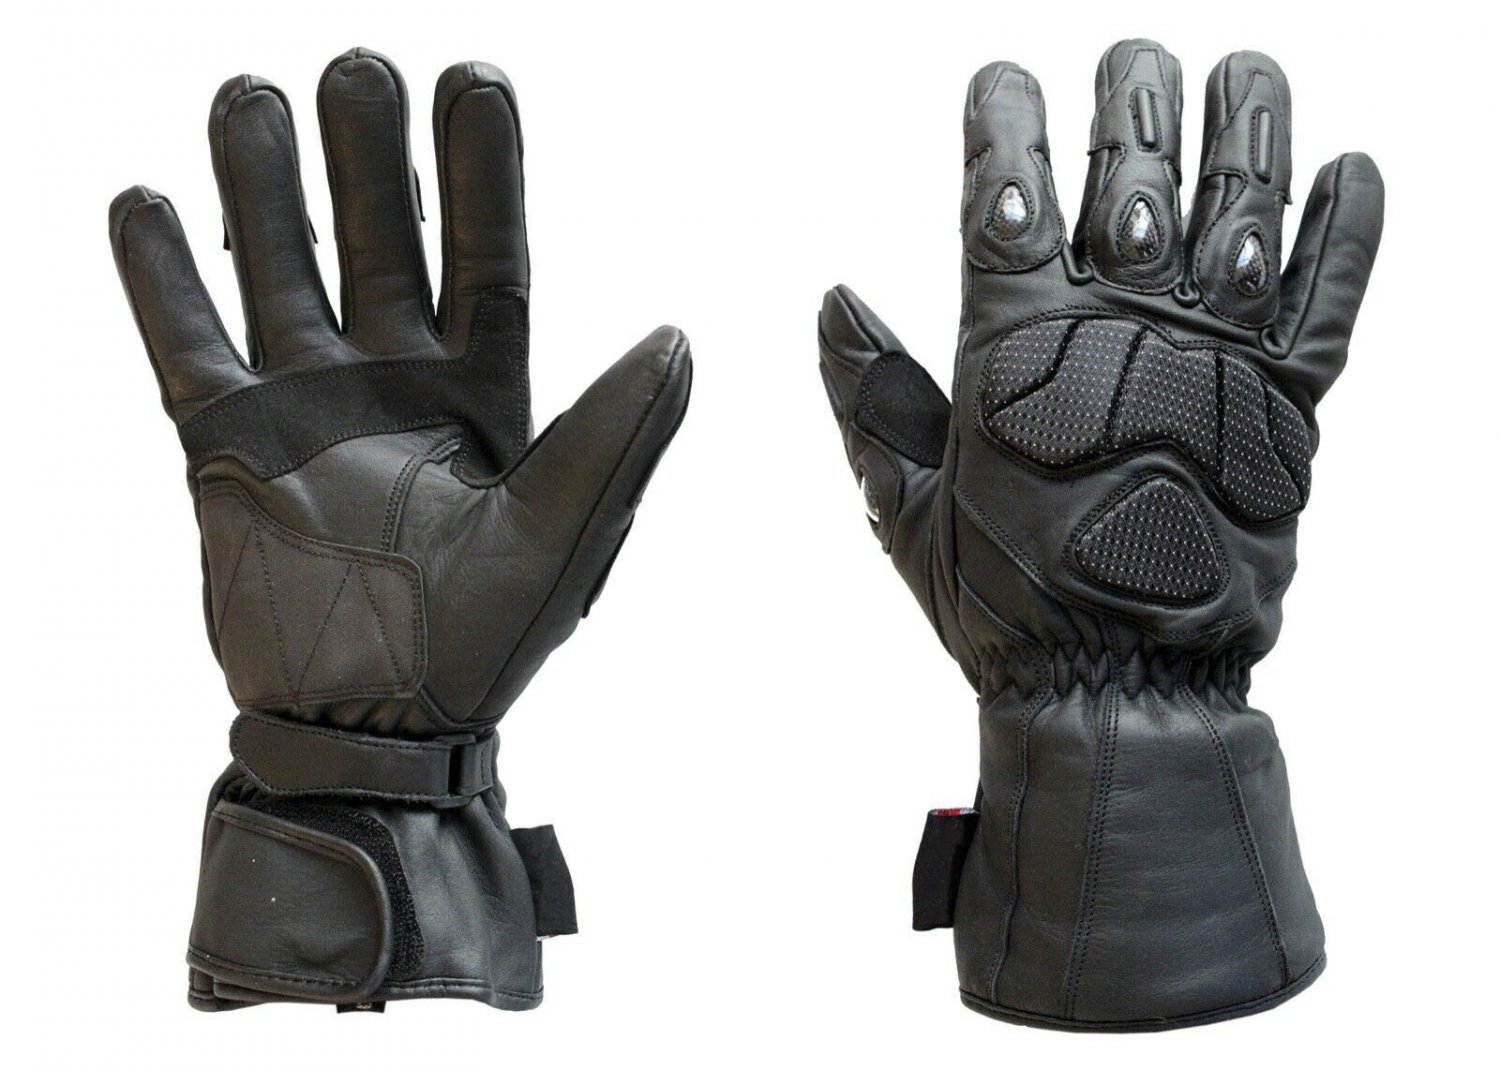 Motorbike Gloves Full Leather Gloves Motorcycle Water proof Warm Winter Gloves- Size M